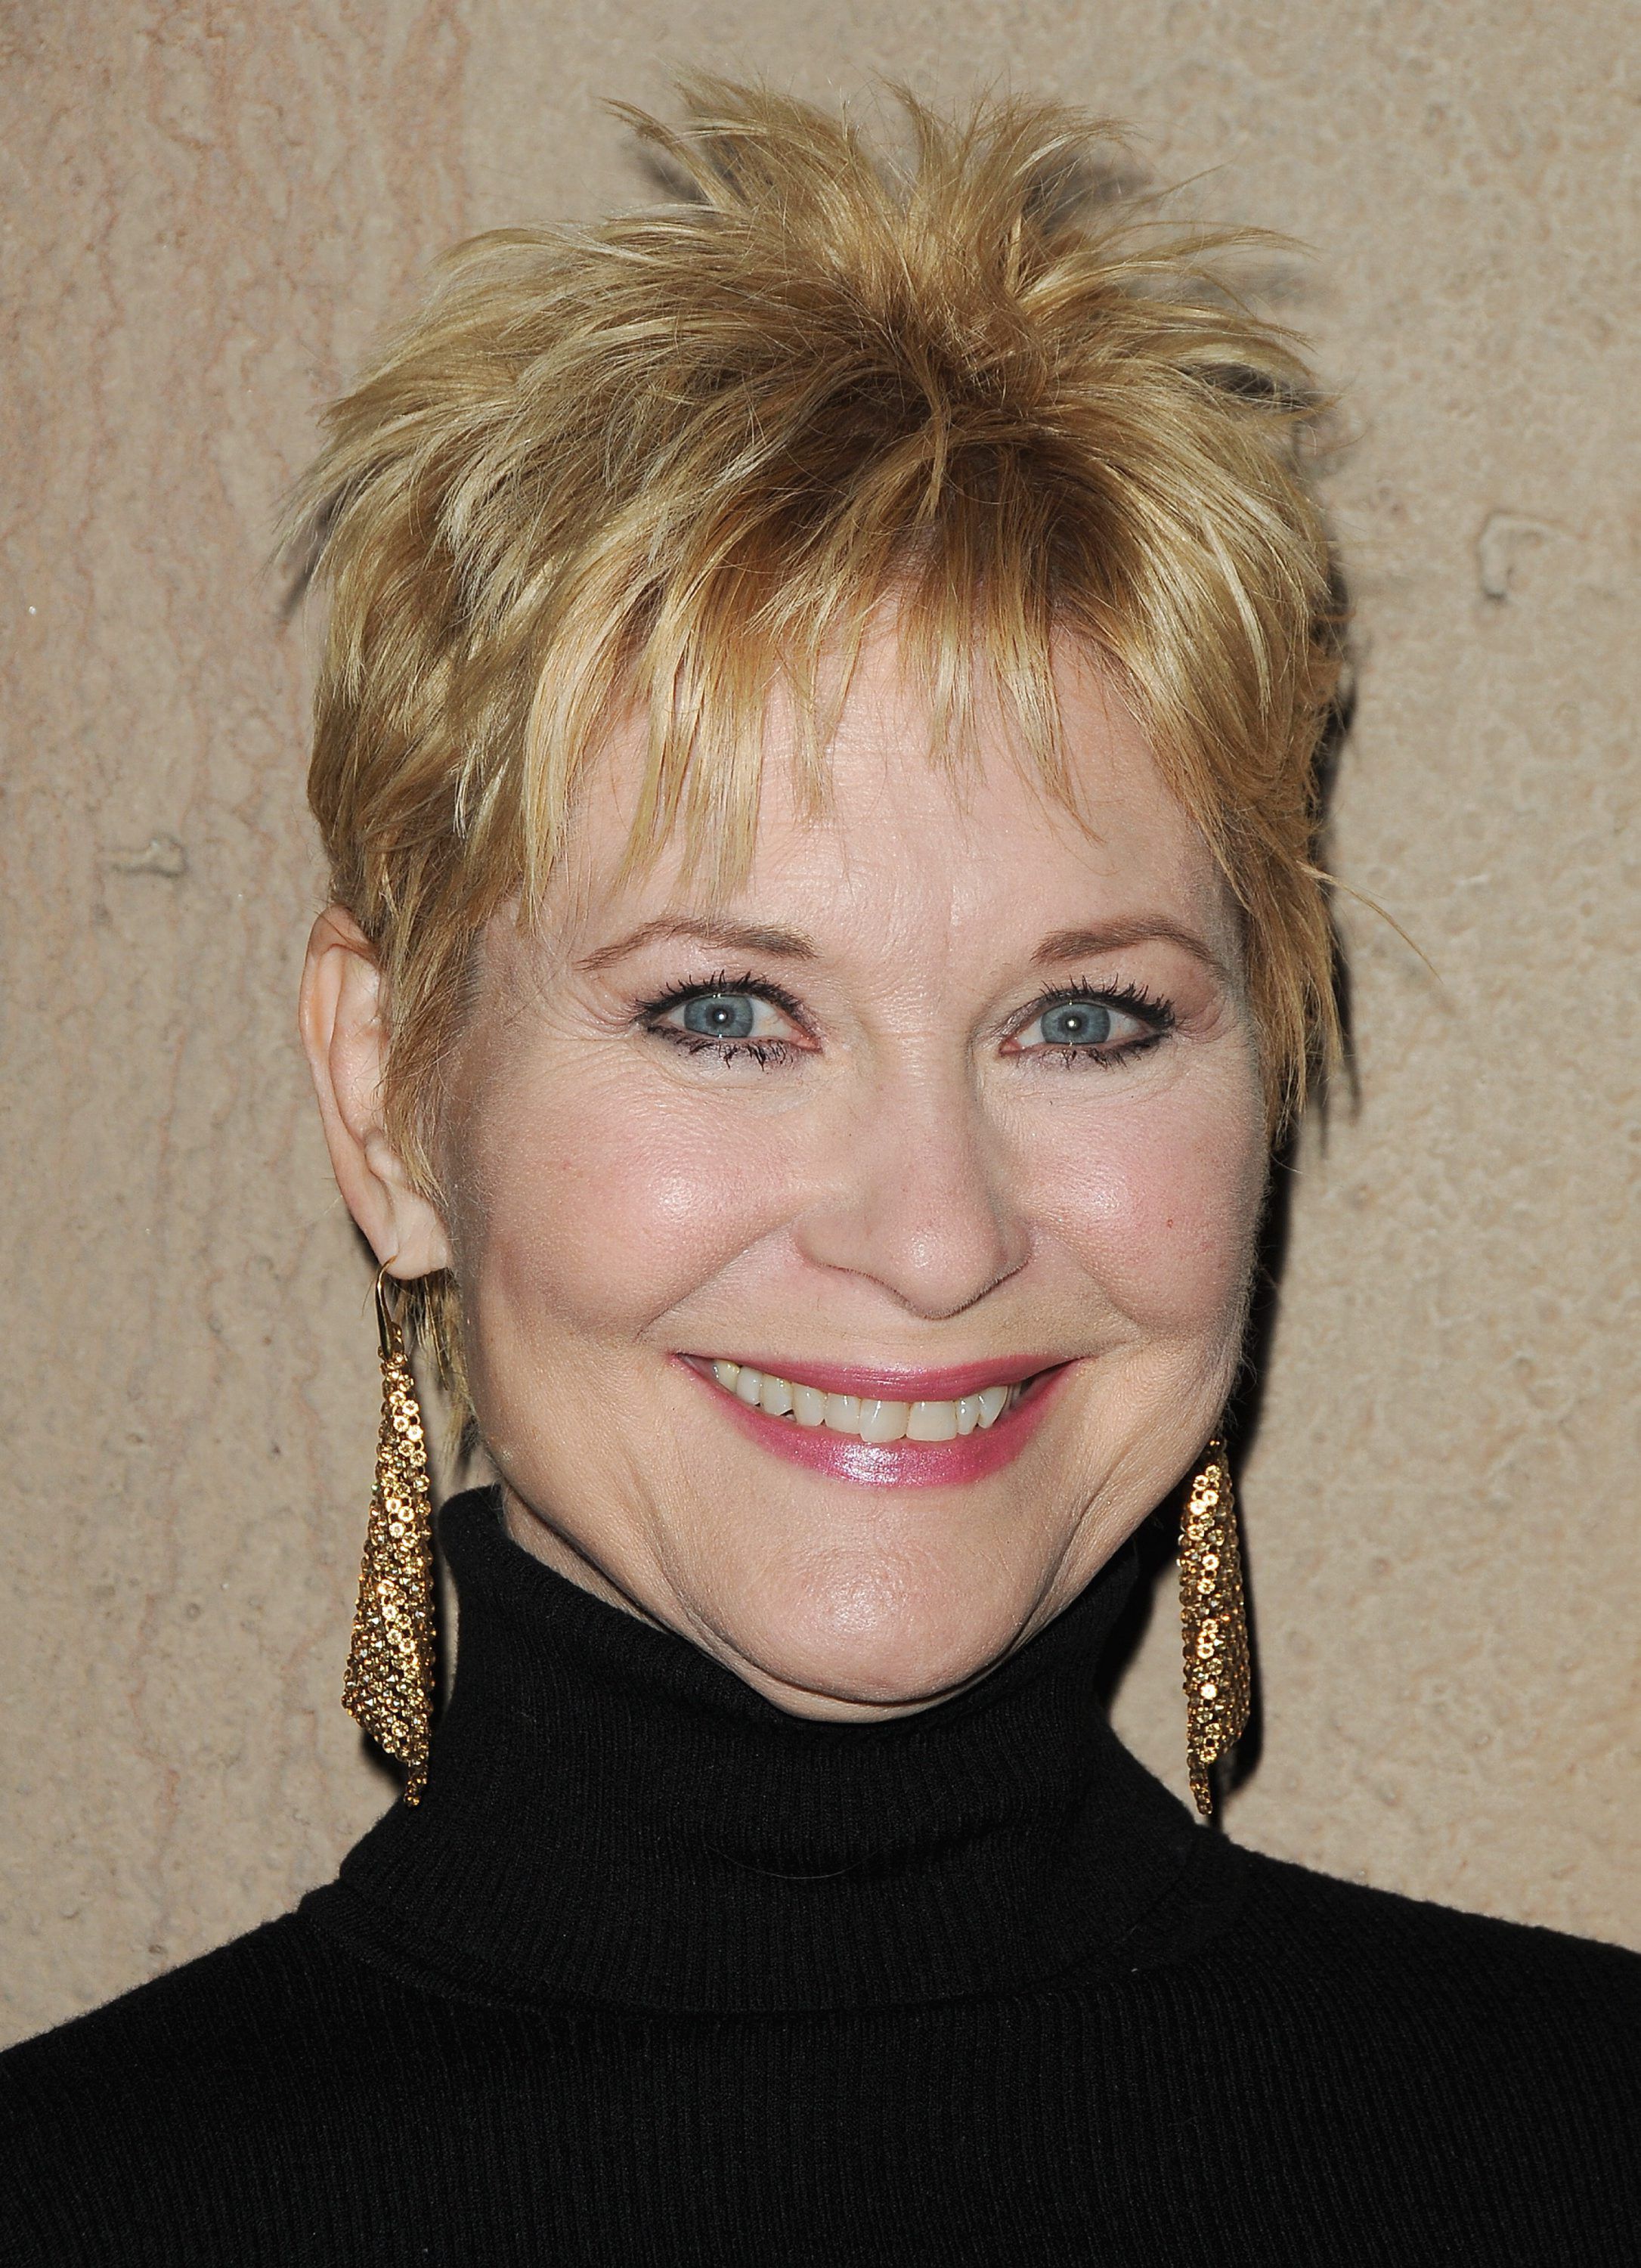 Hot dee wallace 'Stay Home':